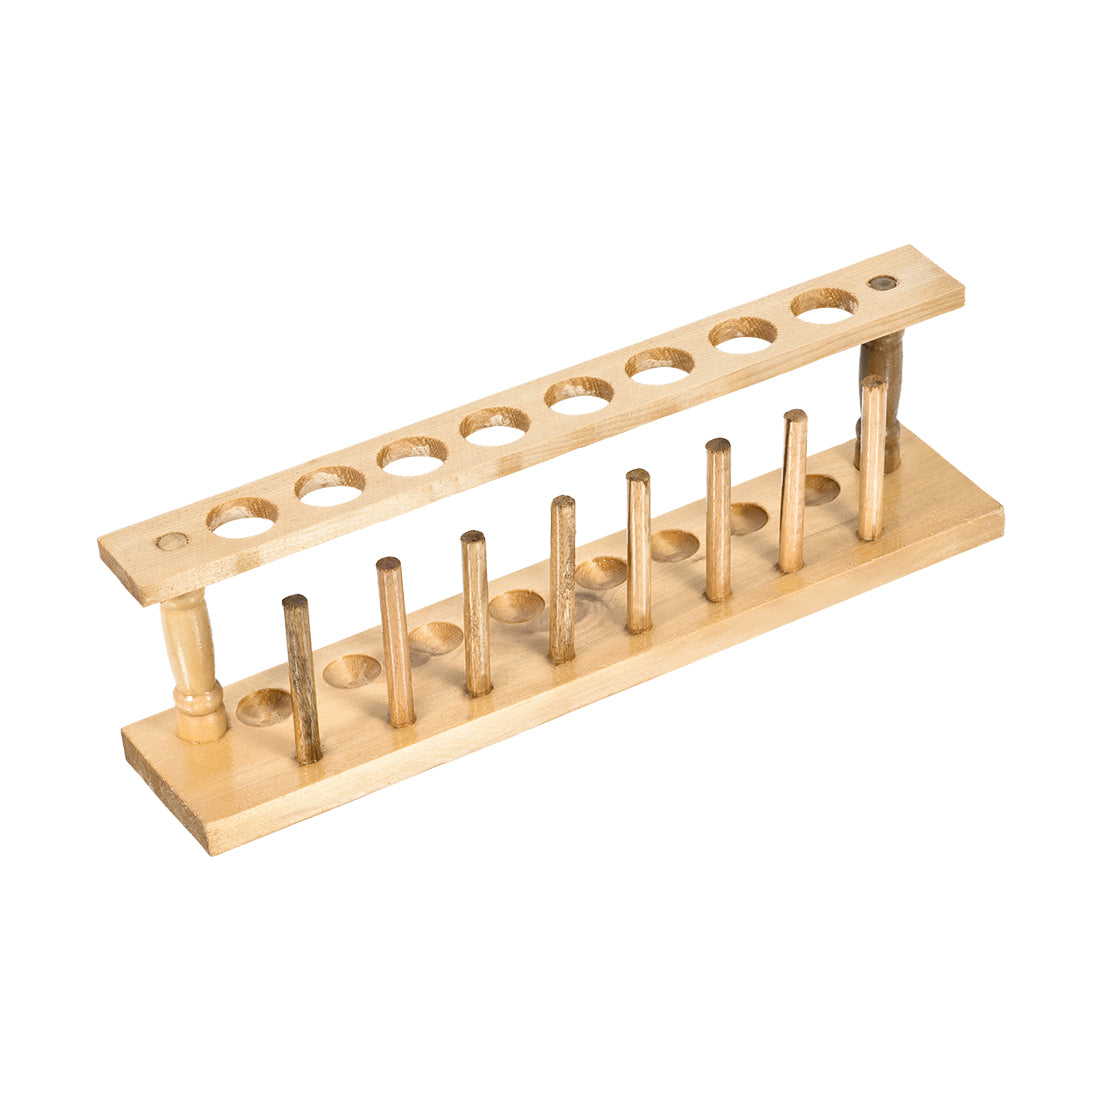 uxcell Uxcell Wooden Test Tube Holder Rack 8 Wells 8 Pins for 16-20mm Centrifuge Tubes